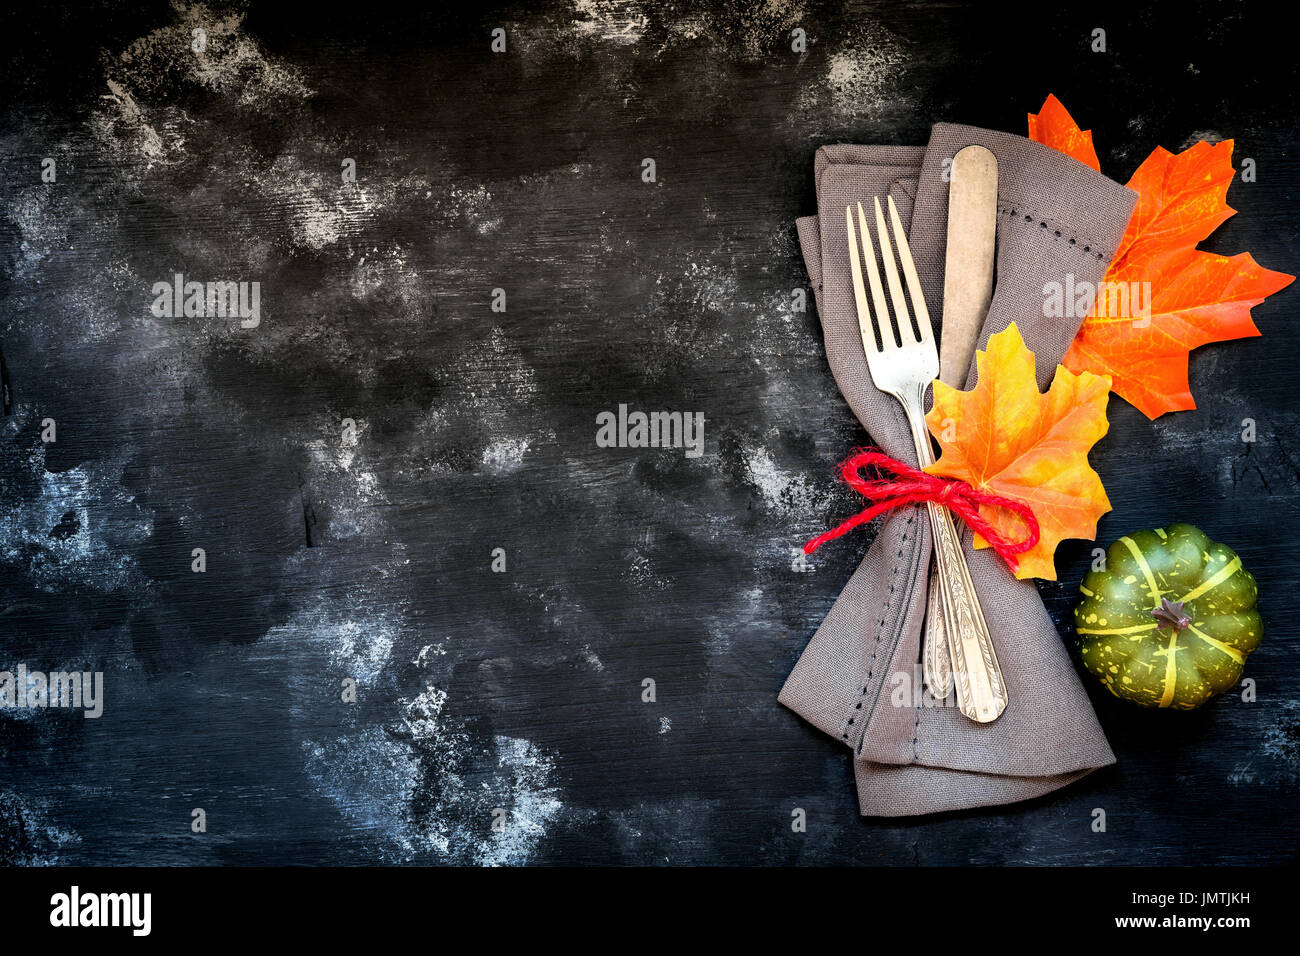 Autumn menu concept - rustic table place setting with a fork and a knife wrapped in a napkin with fall season decorative leaves and pumpkins with copy Stock Photo